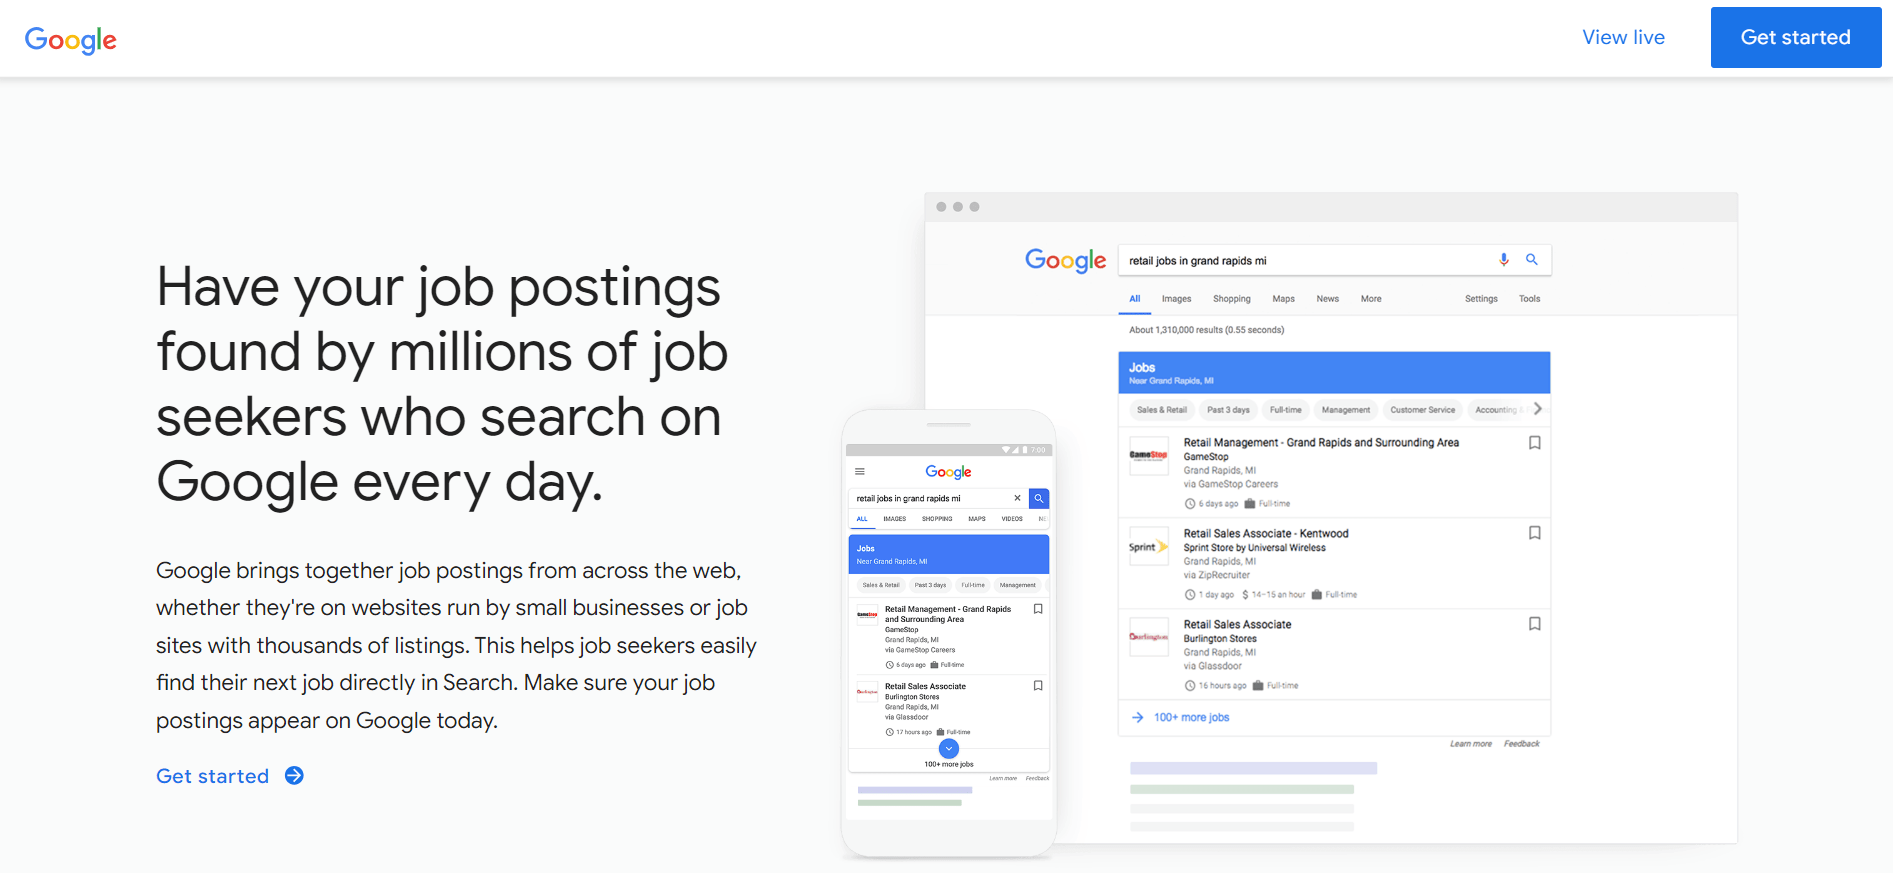 Google for Jobs homepage